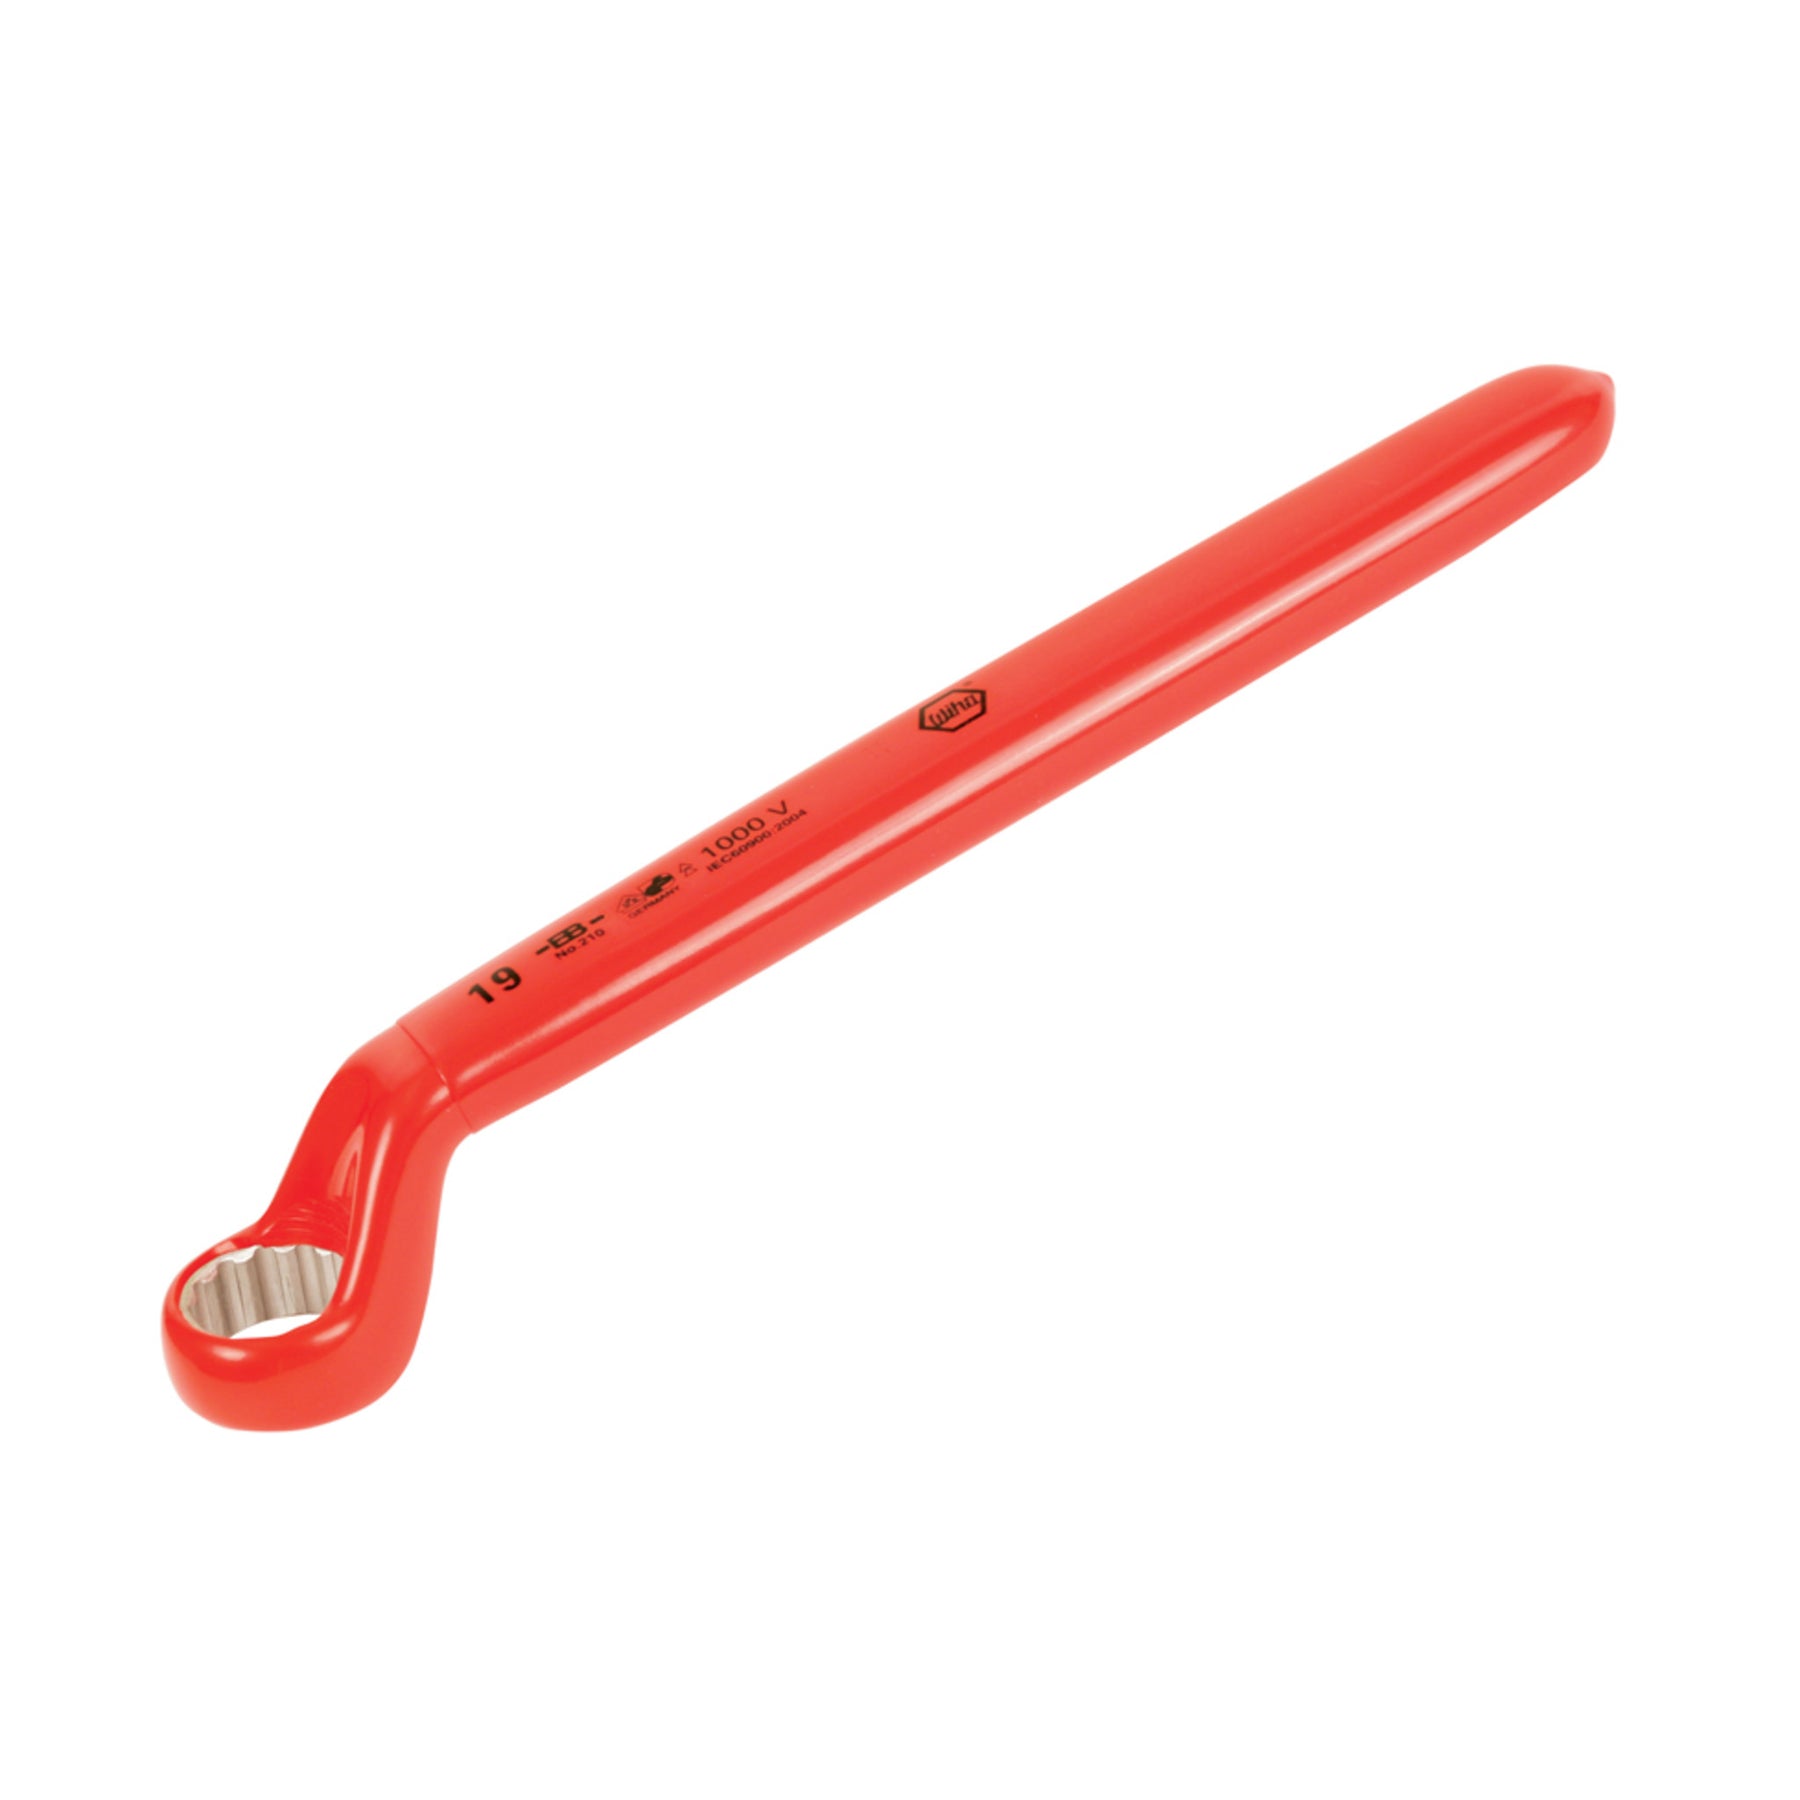 Insulated Deep Offset Wrench 9mm